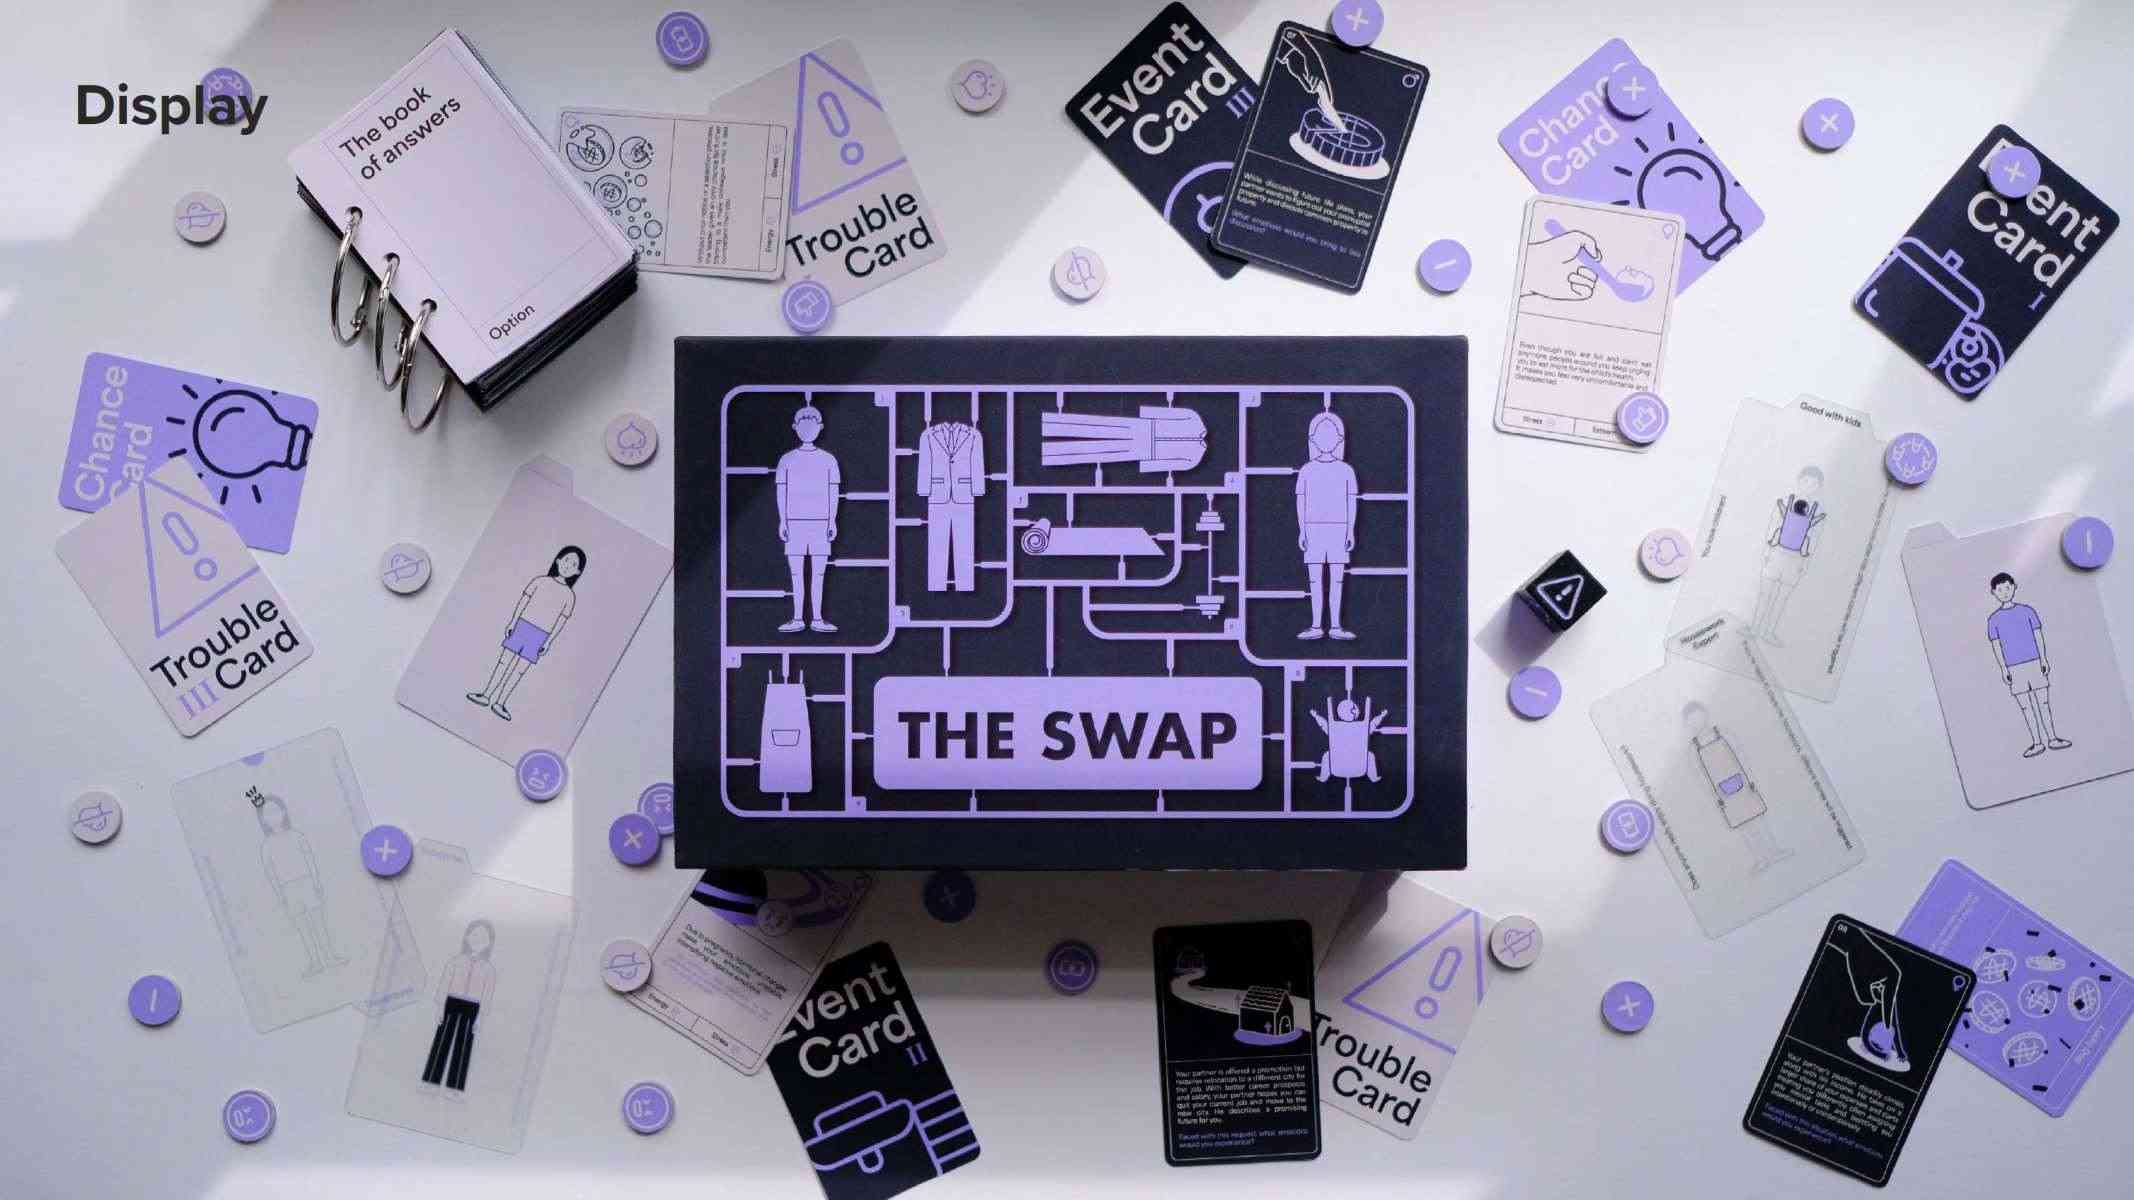 The Swap - A board game designed to reconstruct gender role ideologies by challenging inequalities and platforming discussion. By Shuozhen Fan